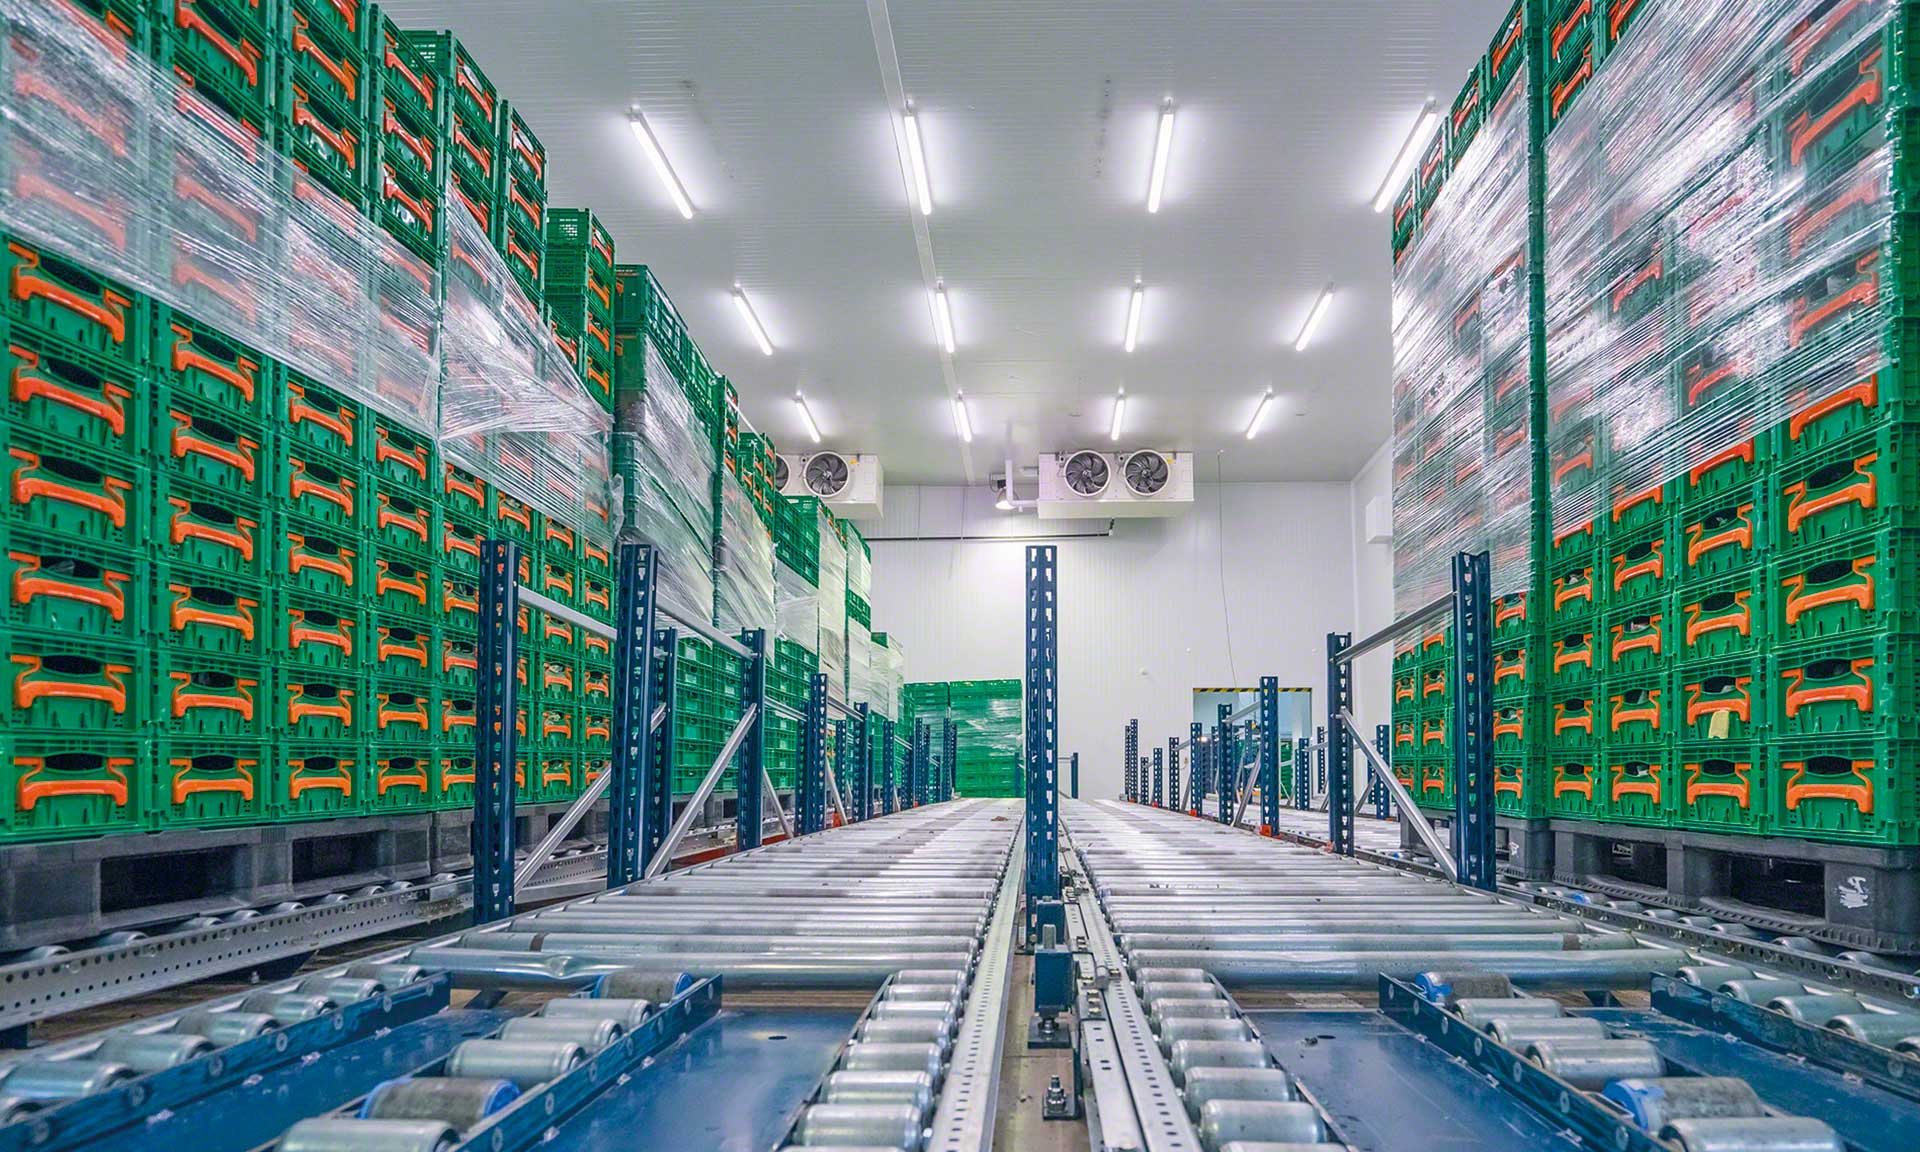 Temperature controlled warehouses keep the goods stored in specific conditions